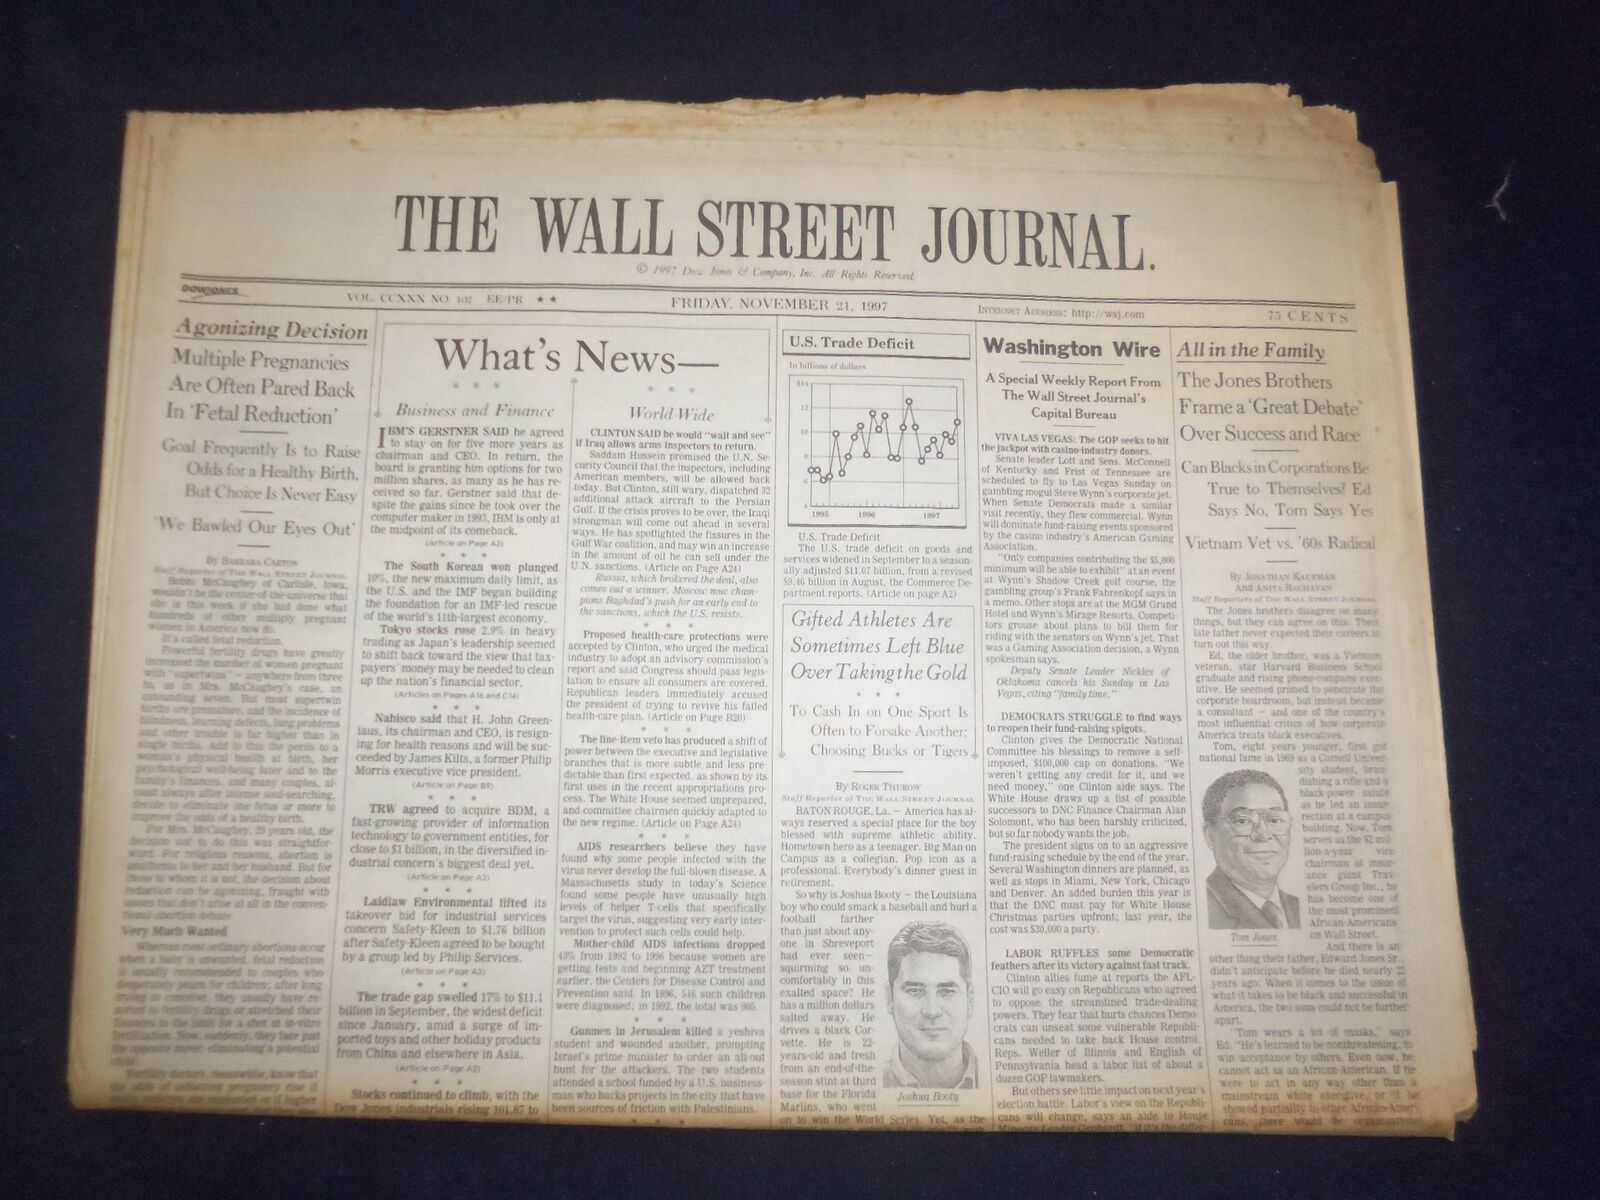 1997 NOV 21 THE WALL STREET JOURNAL - MULTIPLE PREGNANCIES PAIRED BACK - WJ 70